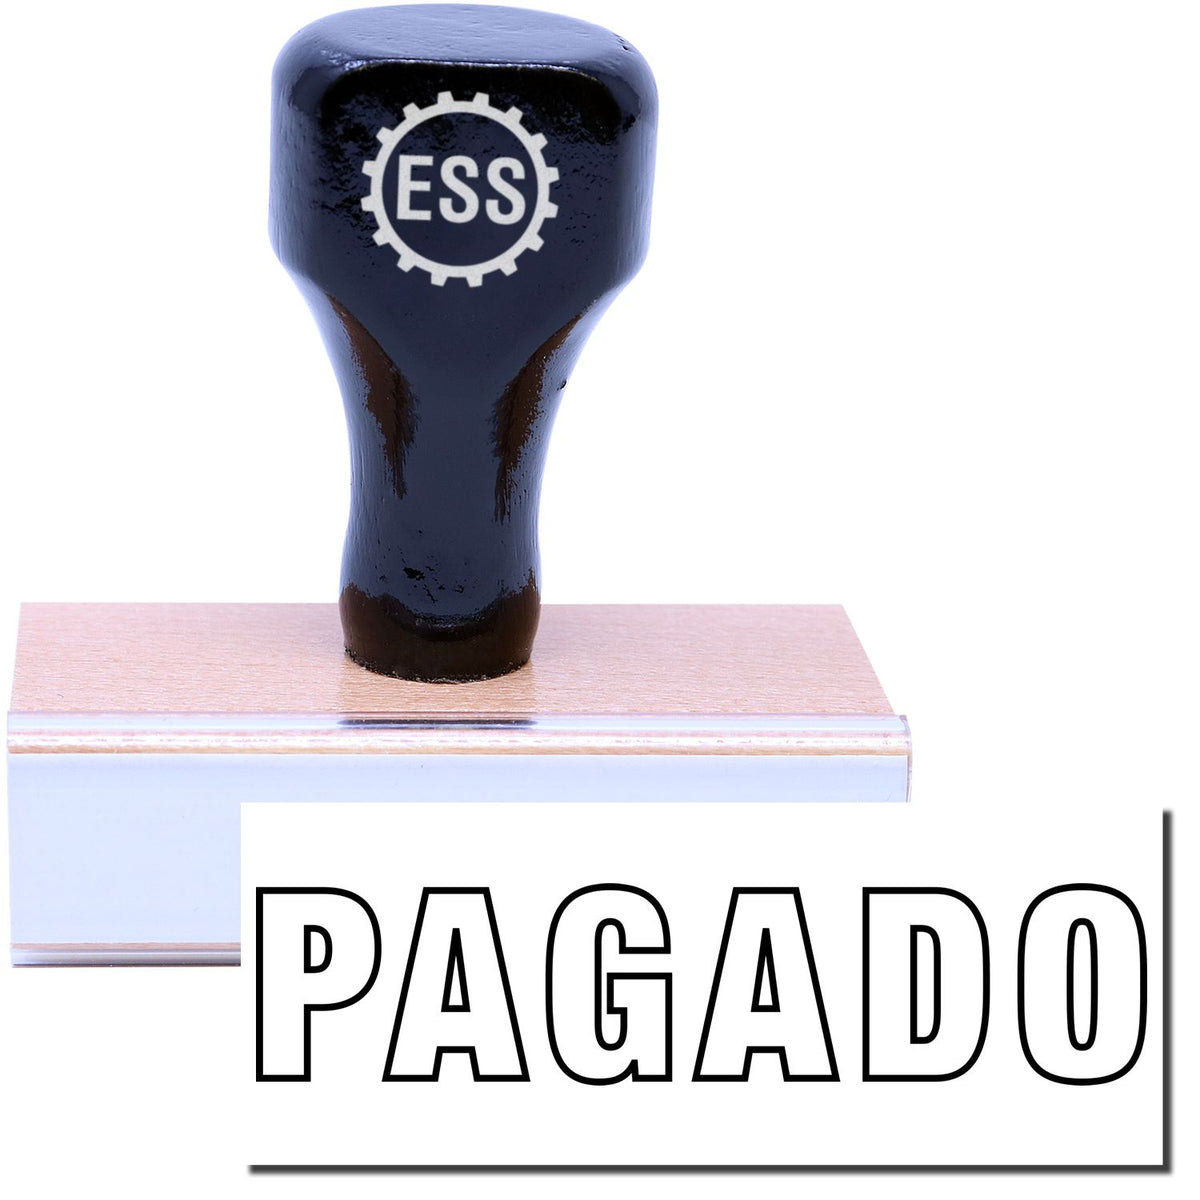 A stock office rubber stamp with a stamped image showing how the text &quot;PAGADO&quot; in a large outline font is displayed after stamping.